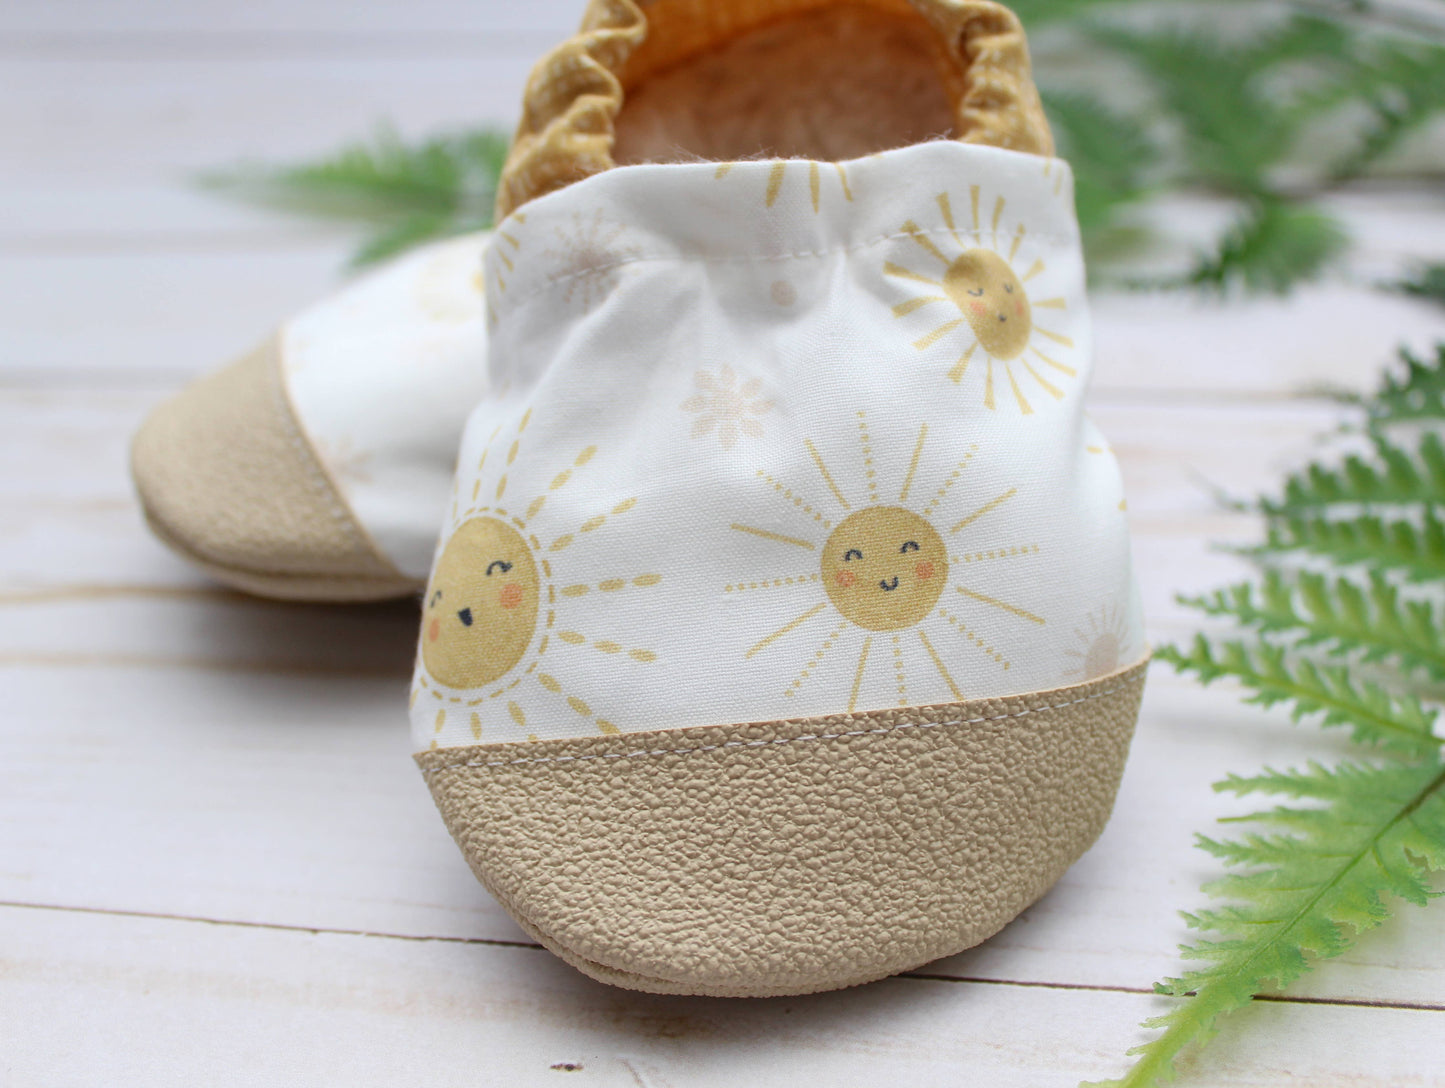 Scooter Booties - Sunshine Baby Shoes: 18 - 24 months